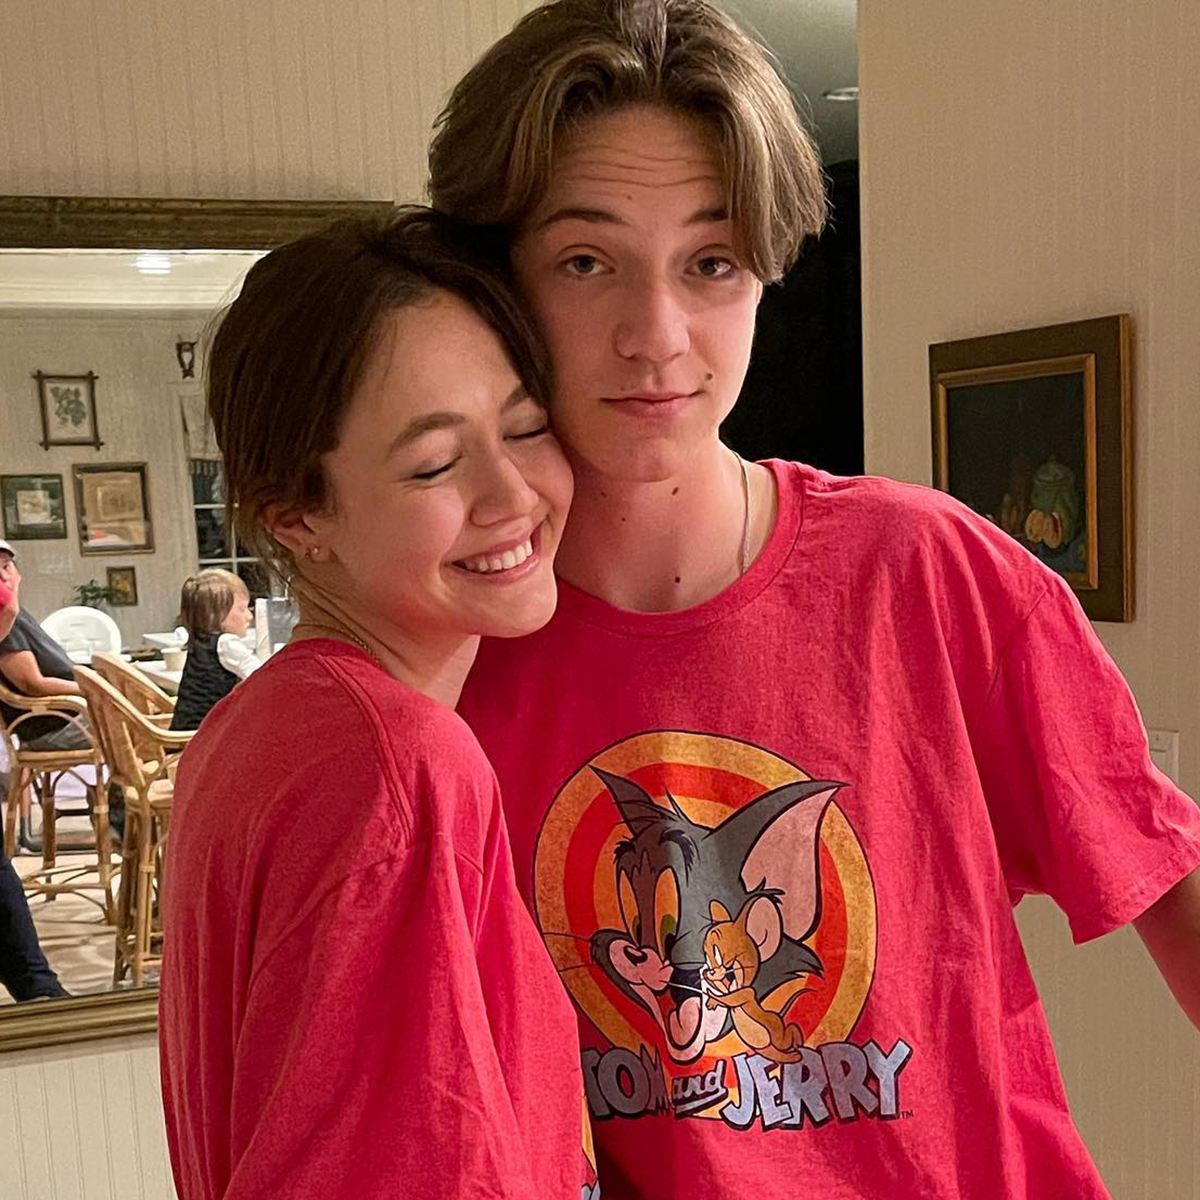 Judd Apatow's Daughter Iris Apatow Is Now Dating Kate Hudson's Son